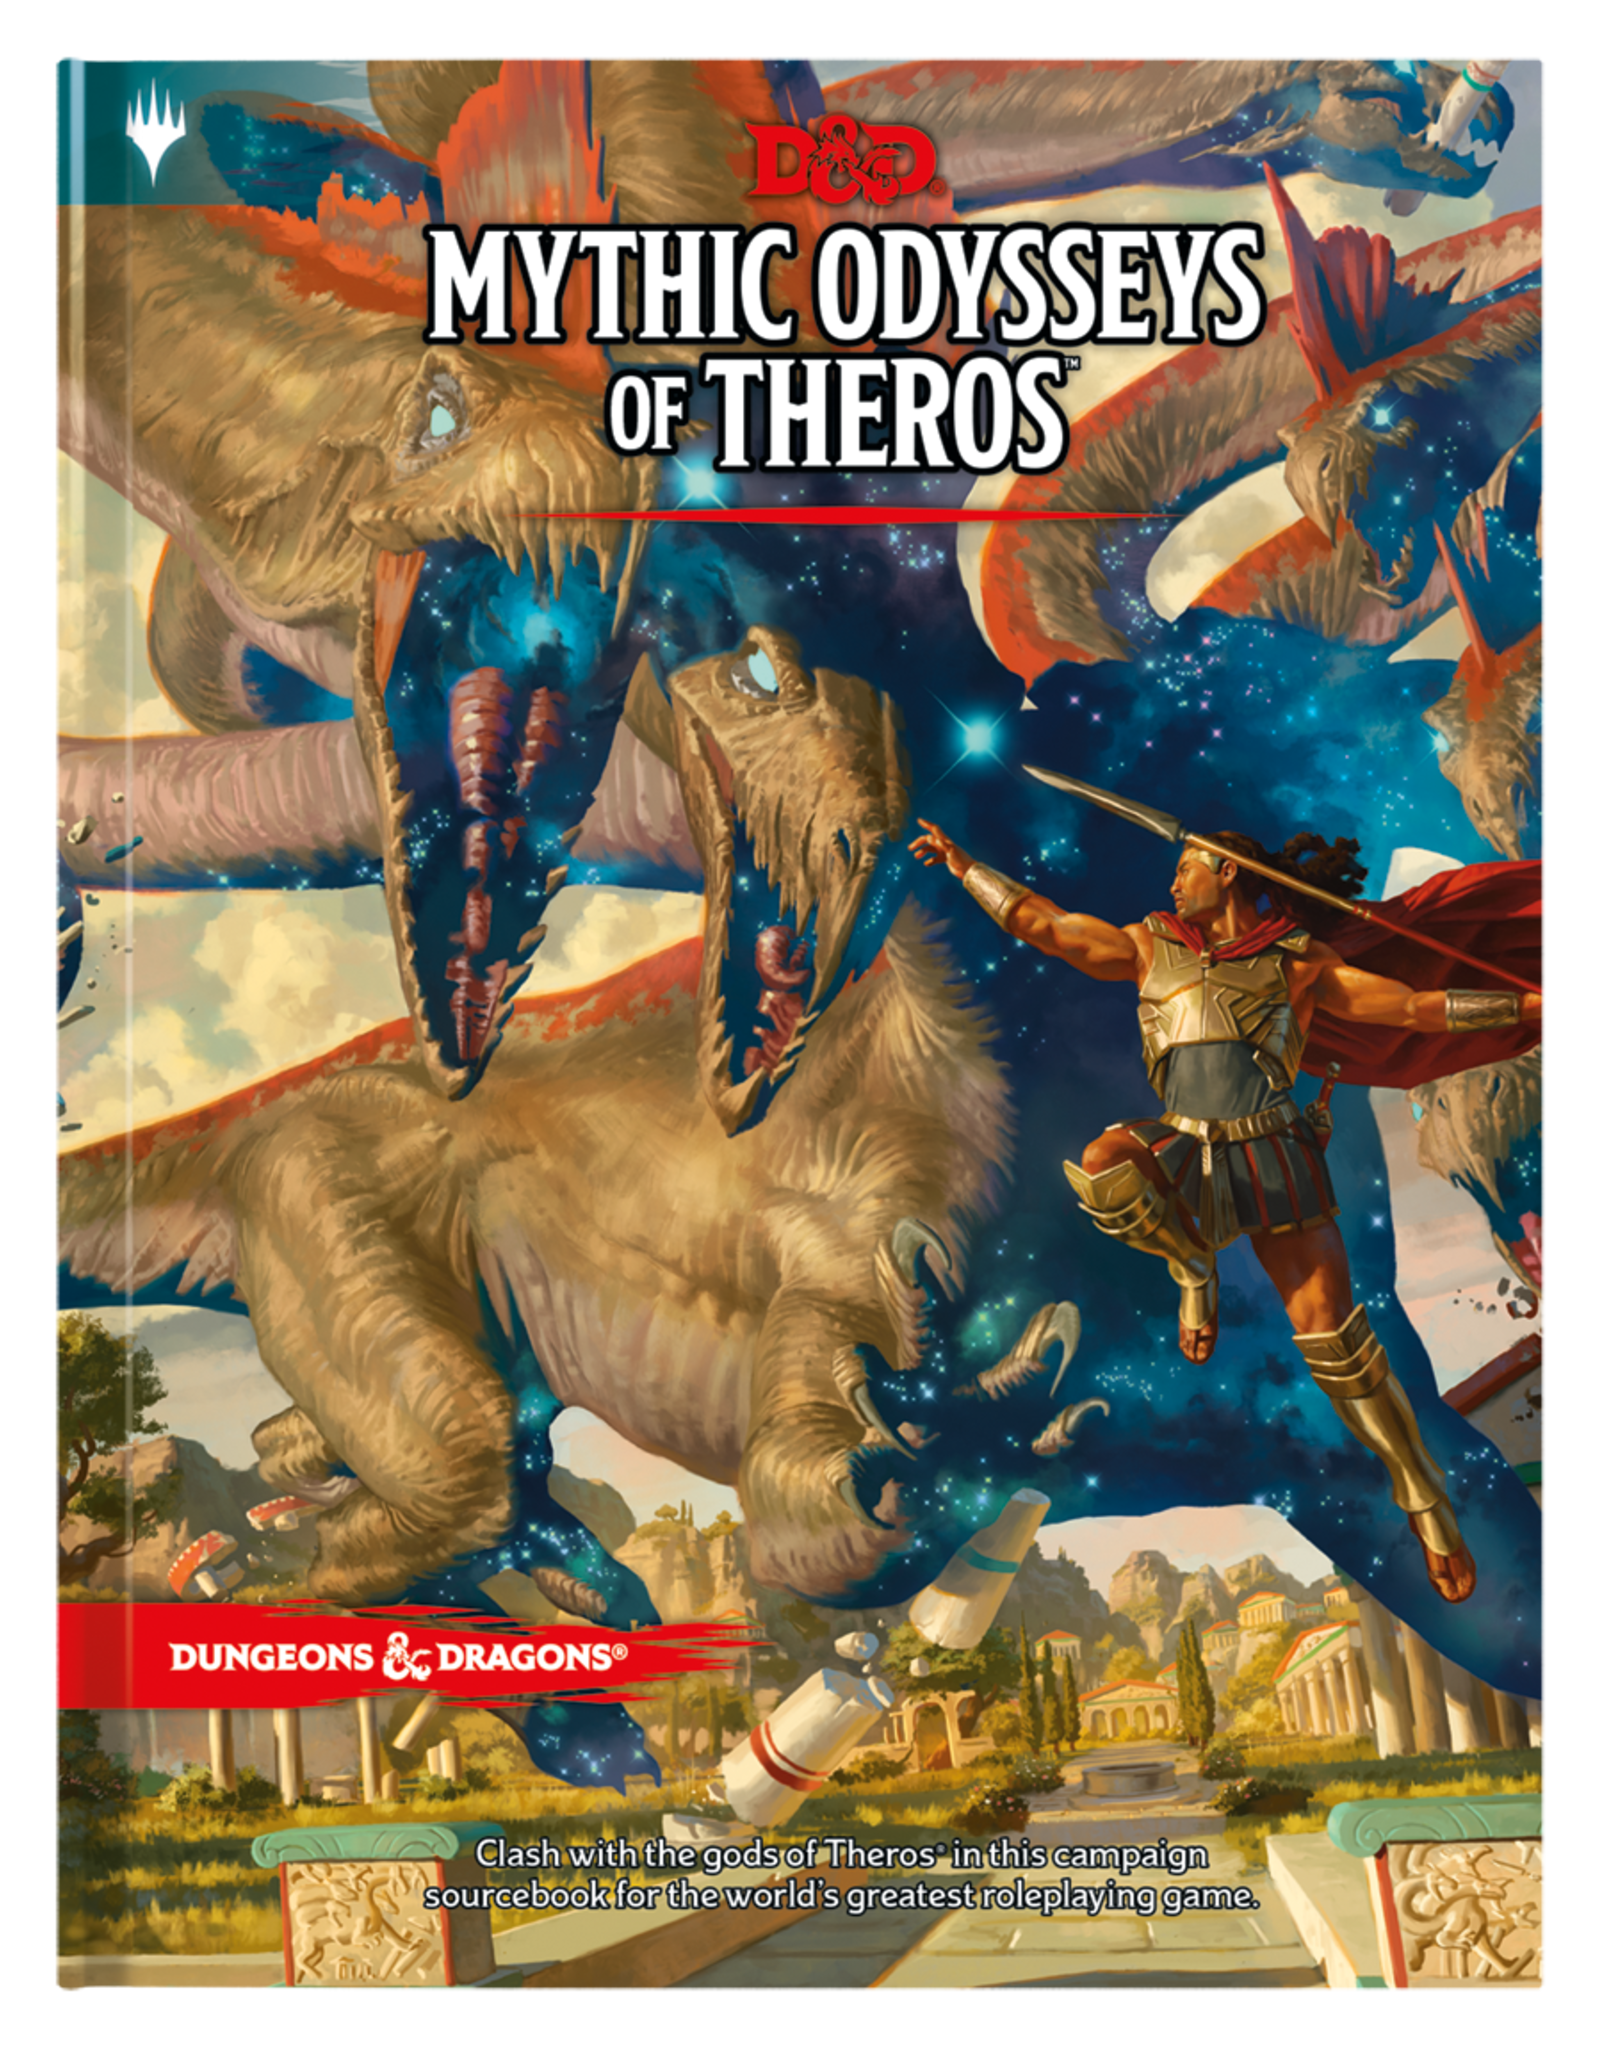 Dungeons & Dragons D&D 5e: Mythic Odysseys of Theros